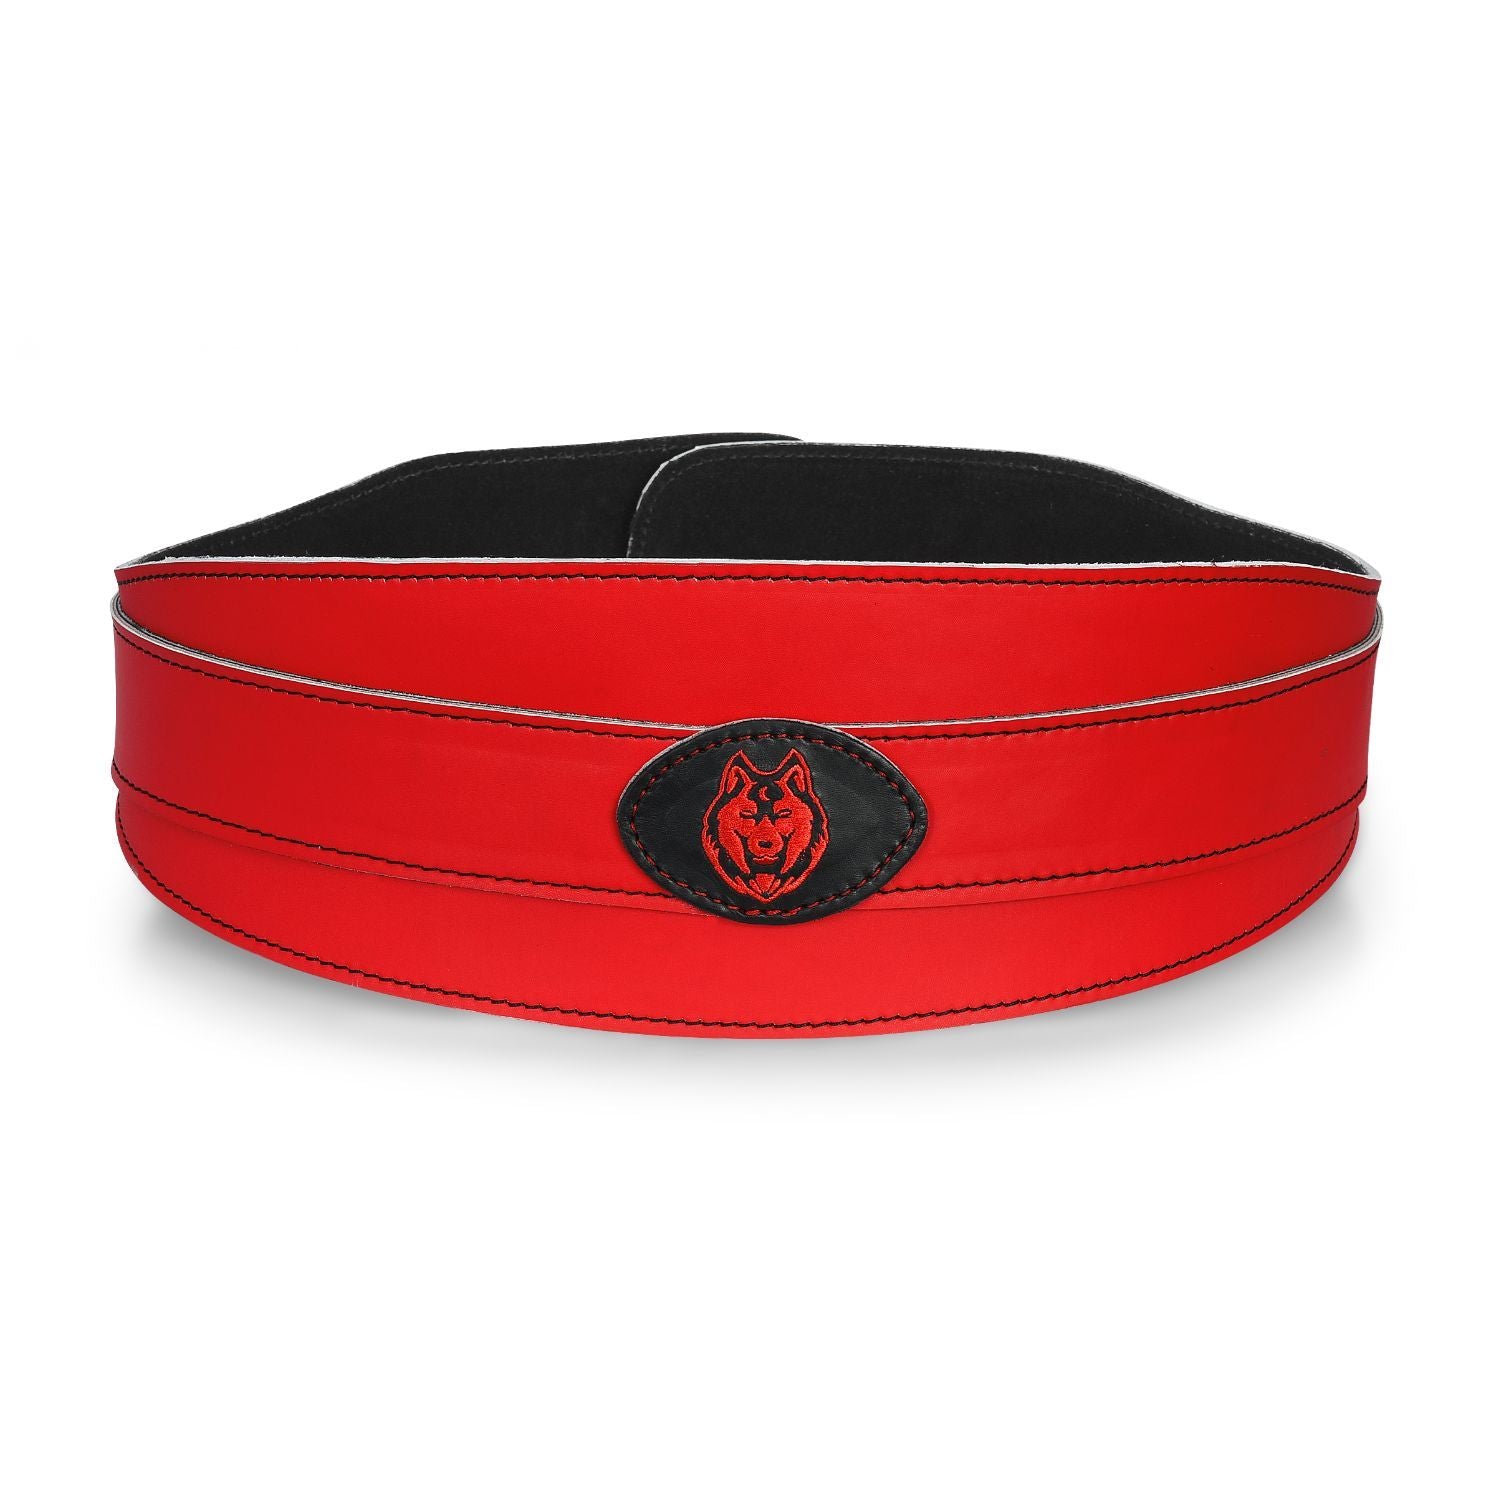 FITNESS FOX 6Inch padded leather Contoured Weightlifting Belt- (Sports Model)